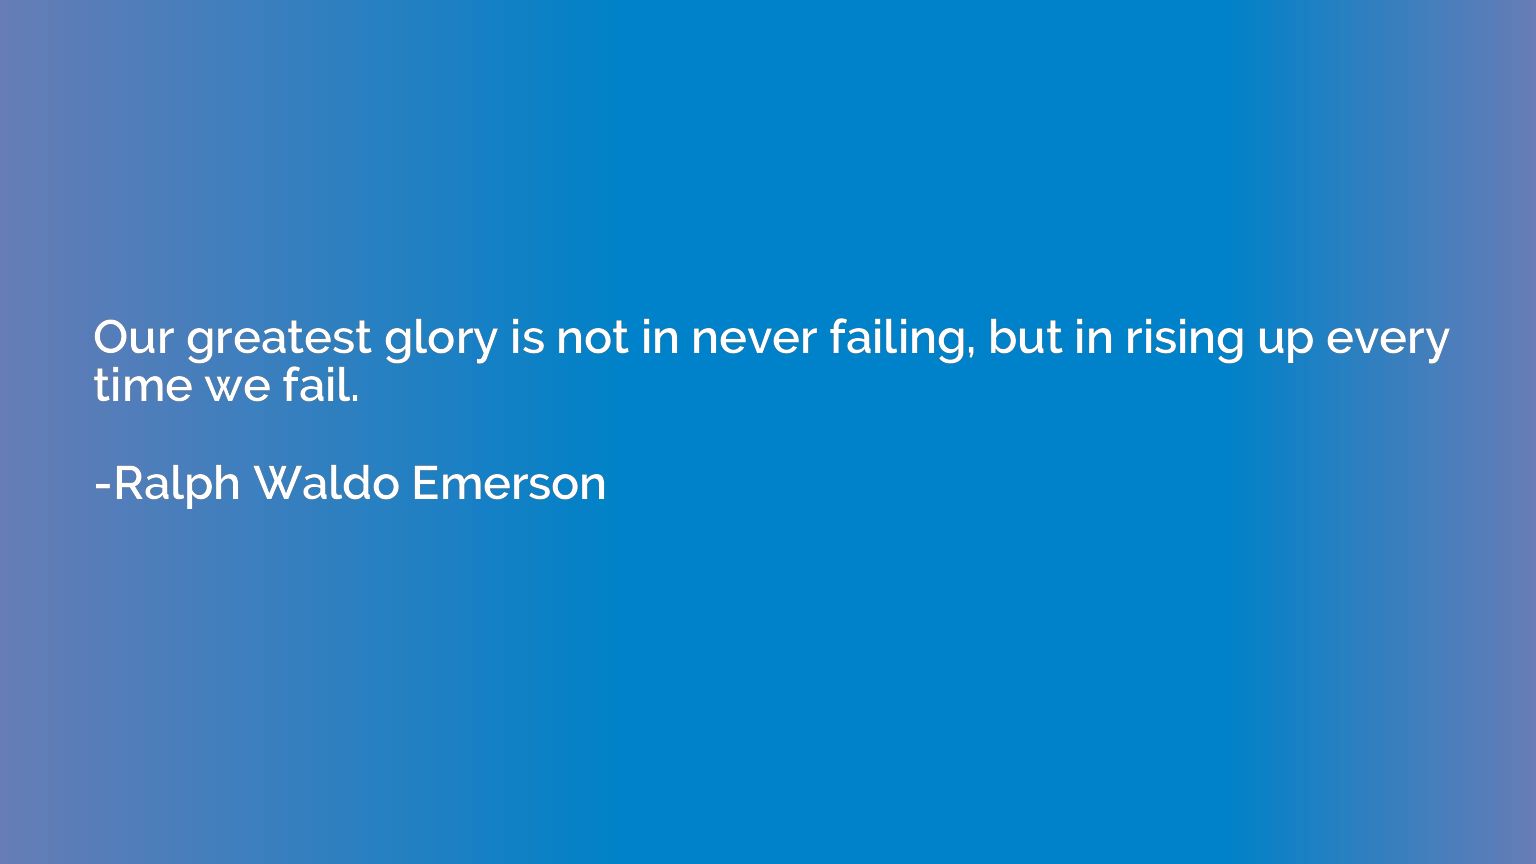 Our greatest glory is not in never failing, but in rising up